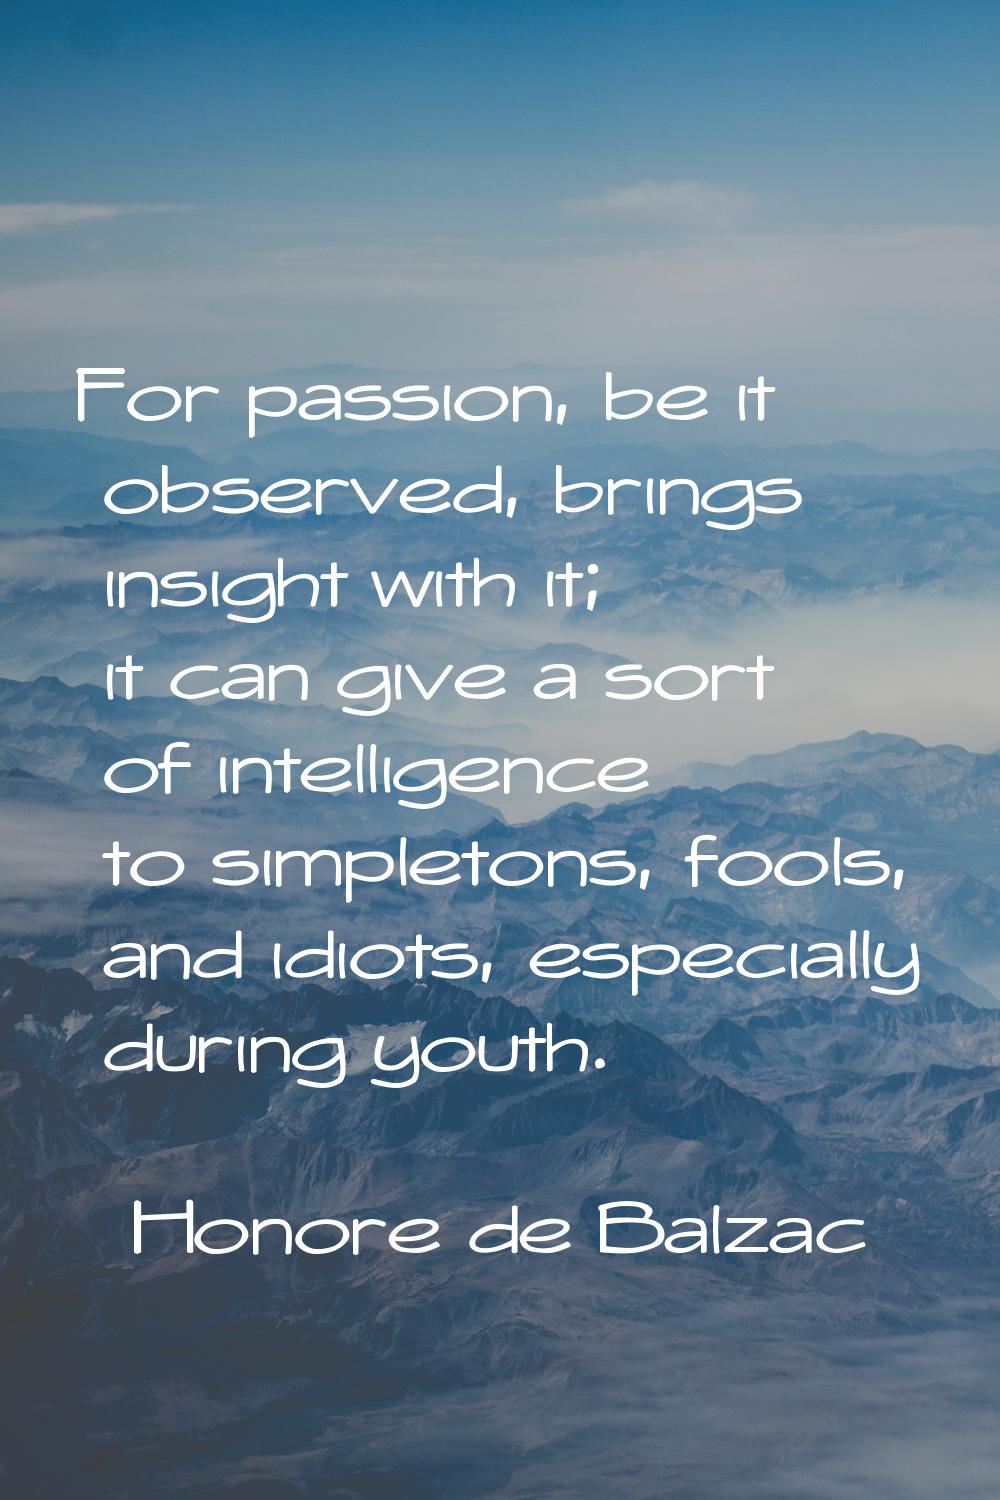 For passion, be it observed, brings insight with it; it can give a sort of intelligence to simpleto